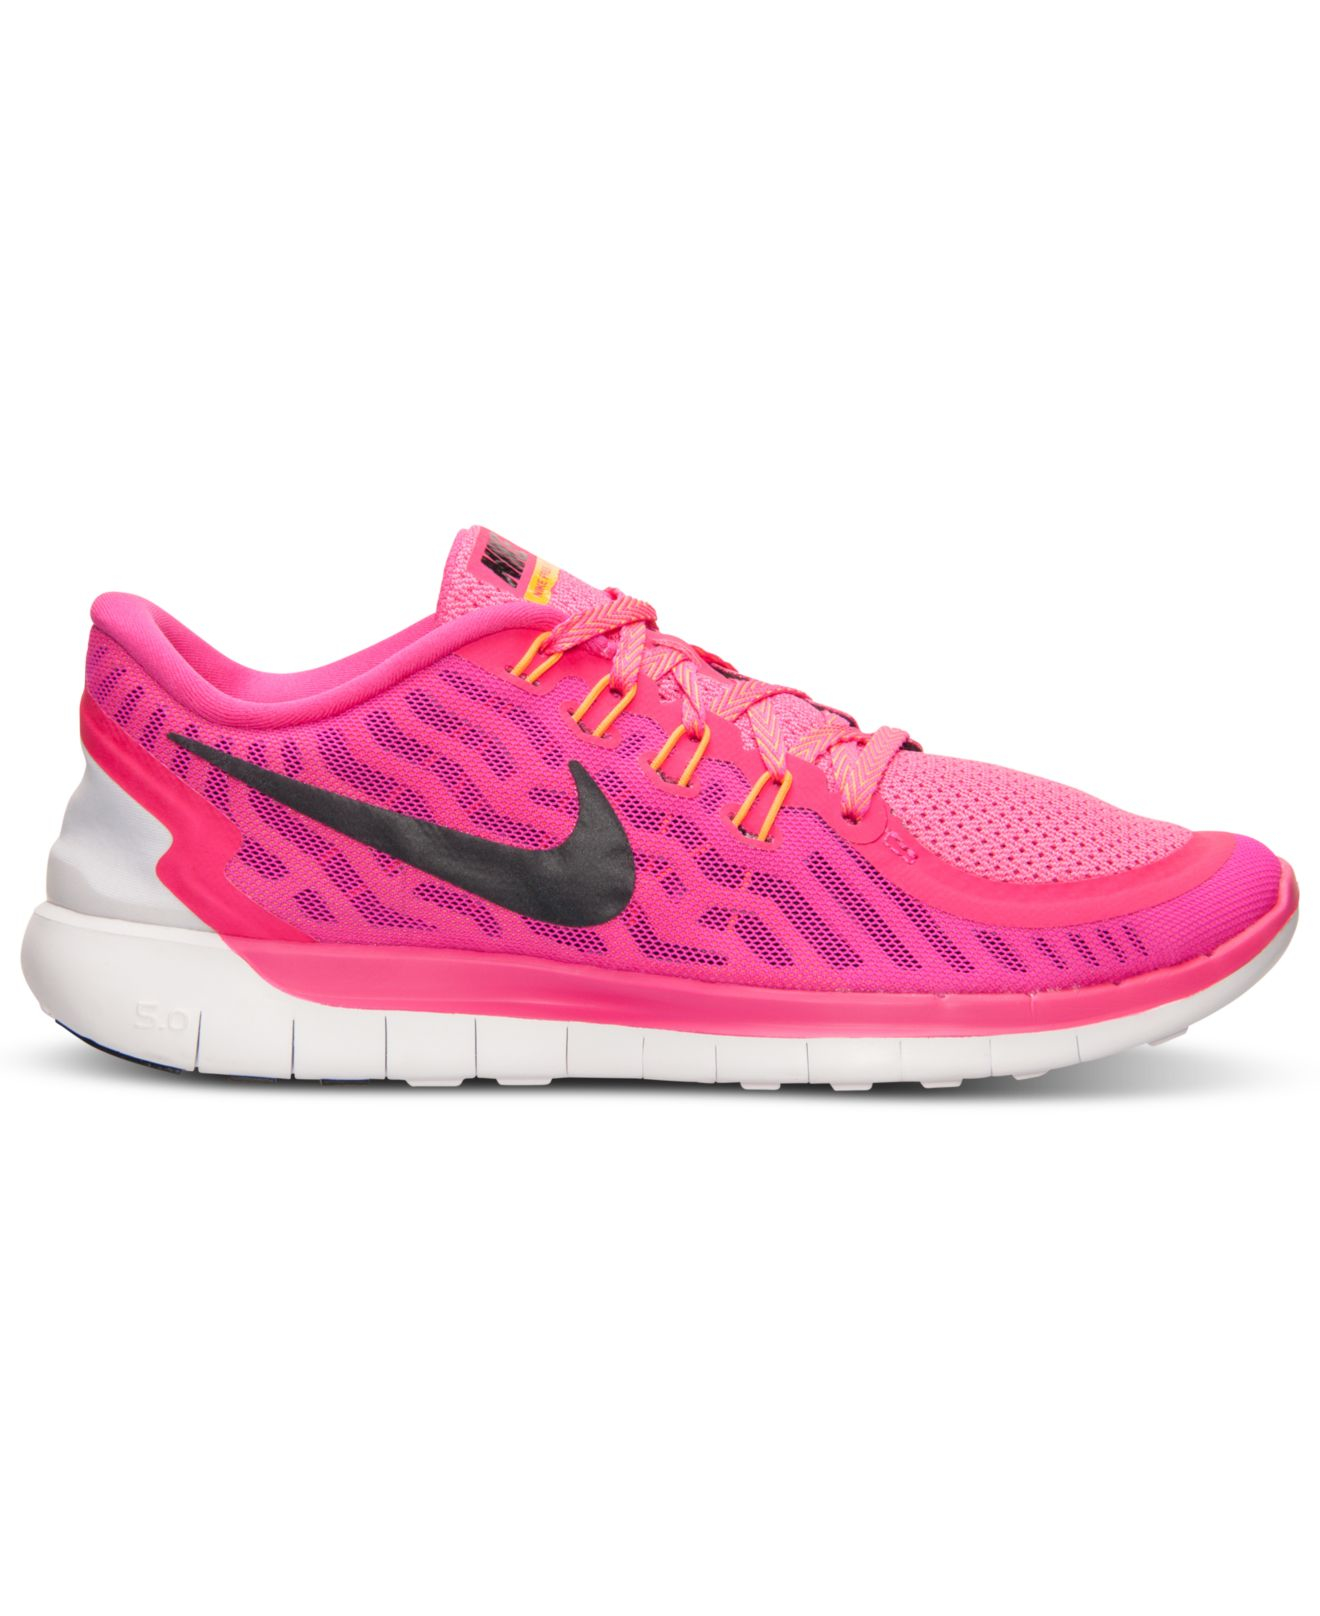 Lyst - Nike Women's Free 5.0 Running Sneakers From Finish Line in Pink